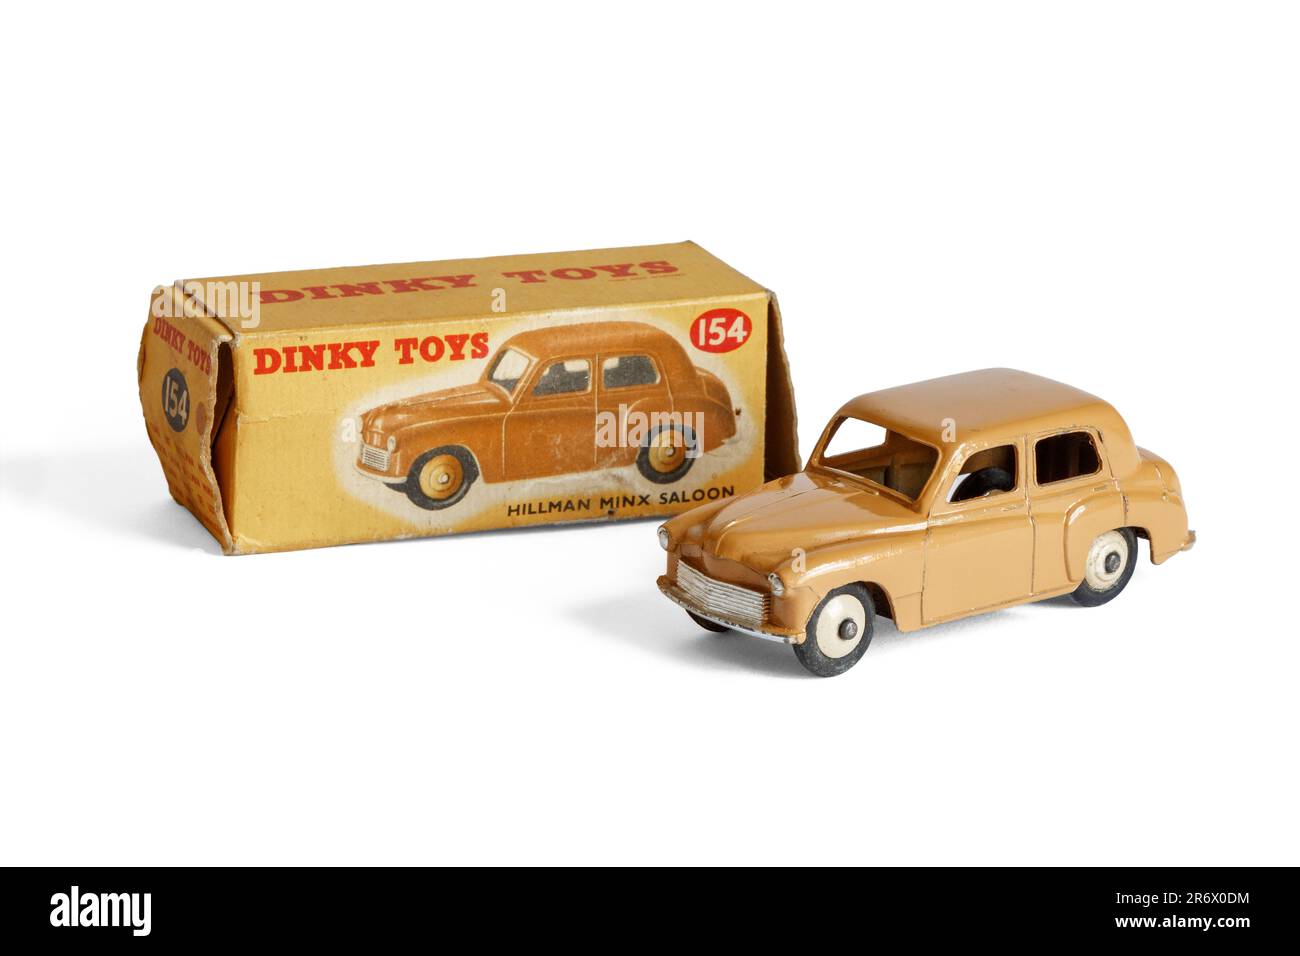 1950s Dinky Dublo Hillman Minx Saloon toy car with original box, isolated on a white background, UK Stock Photo